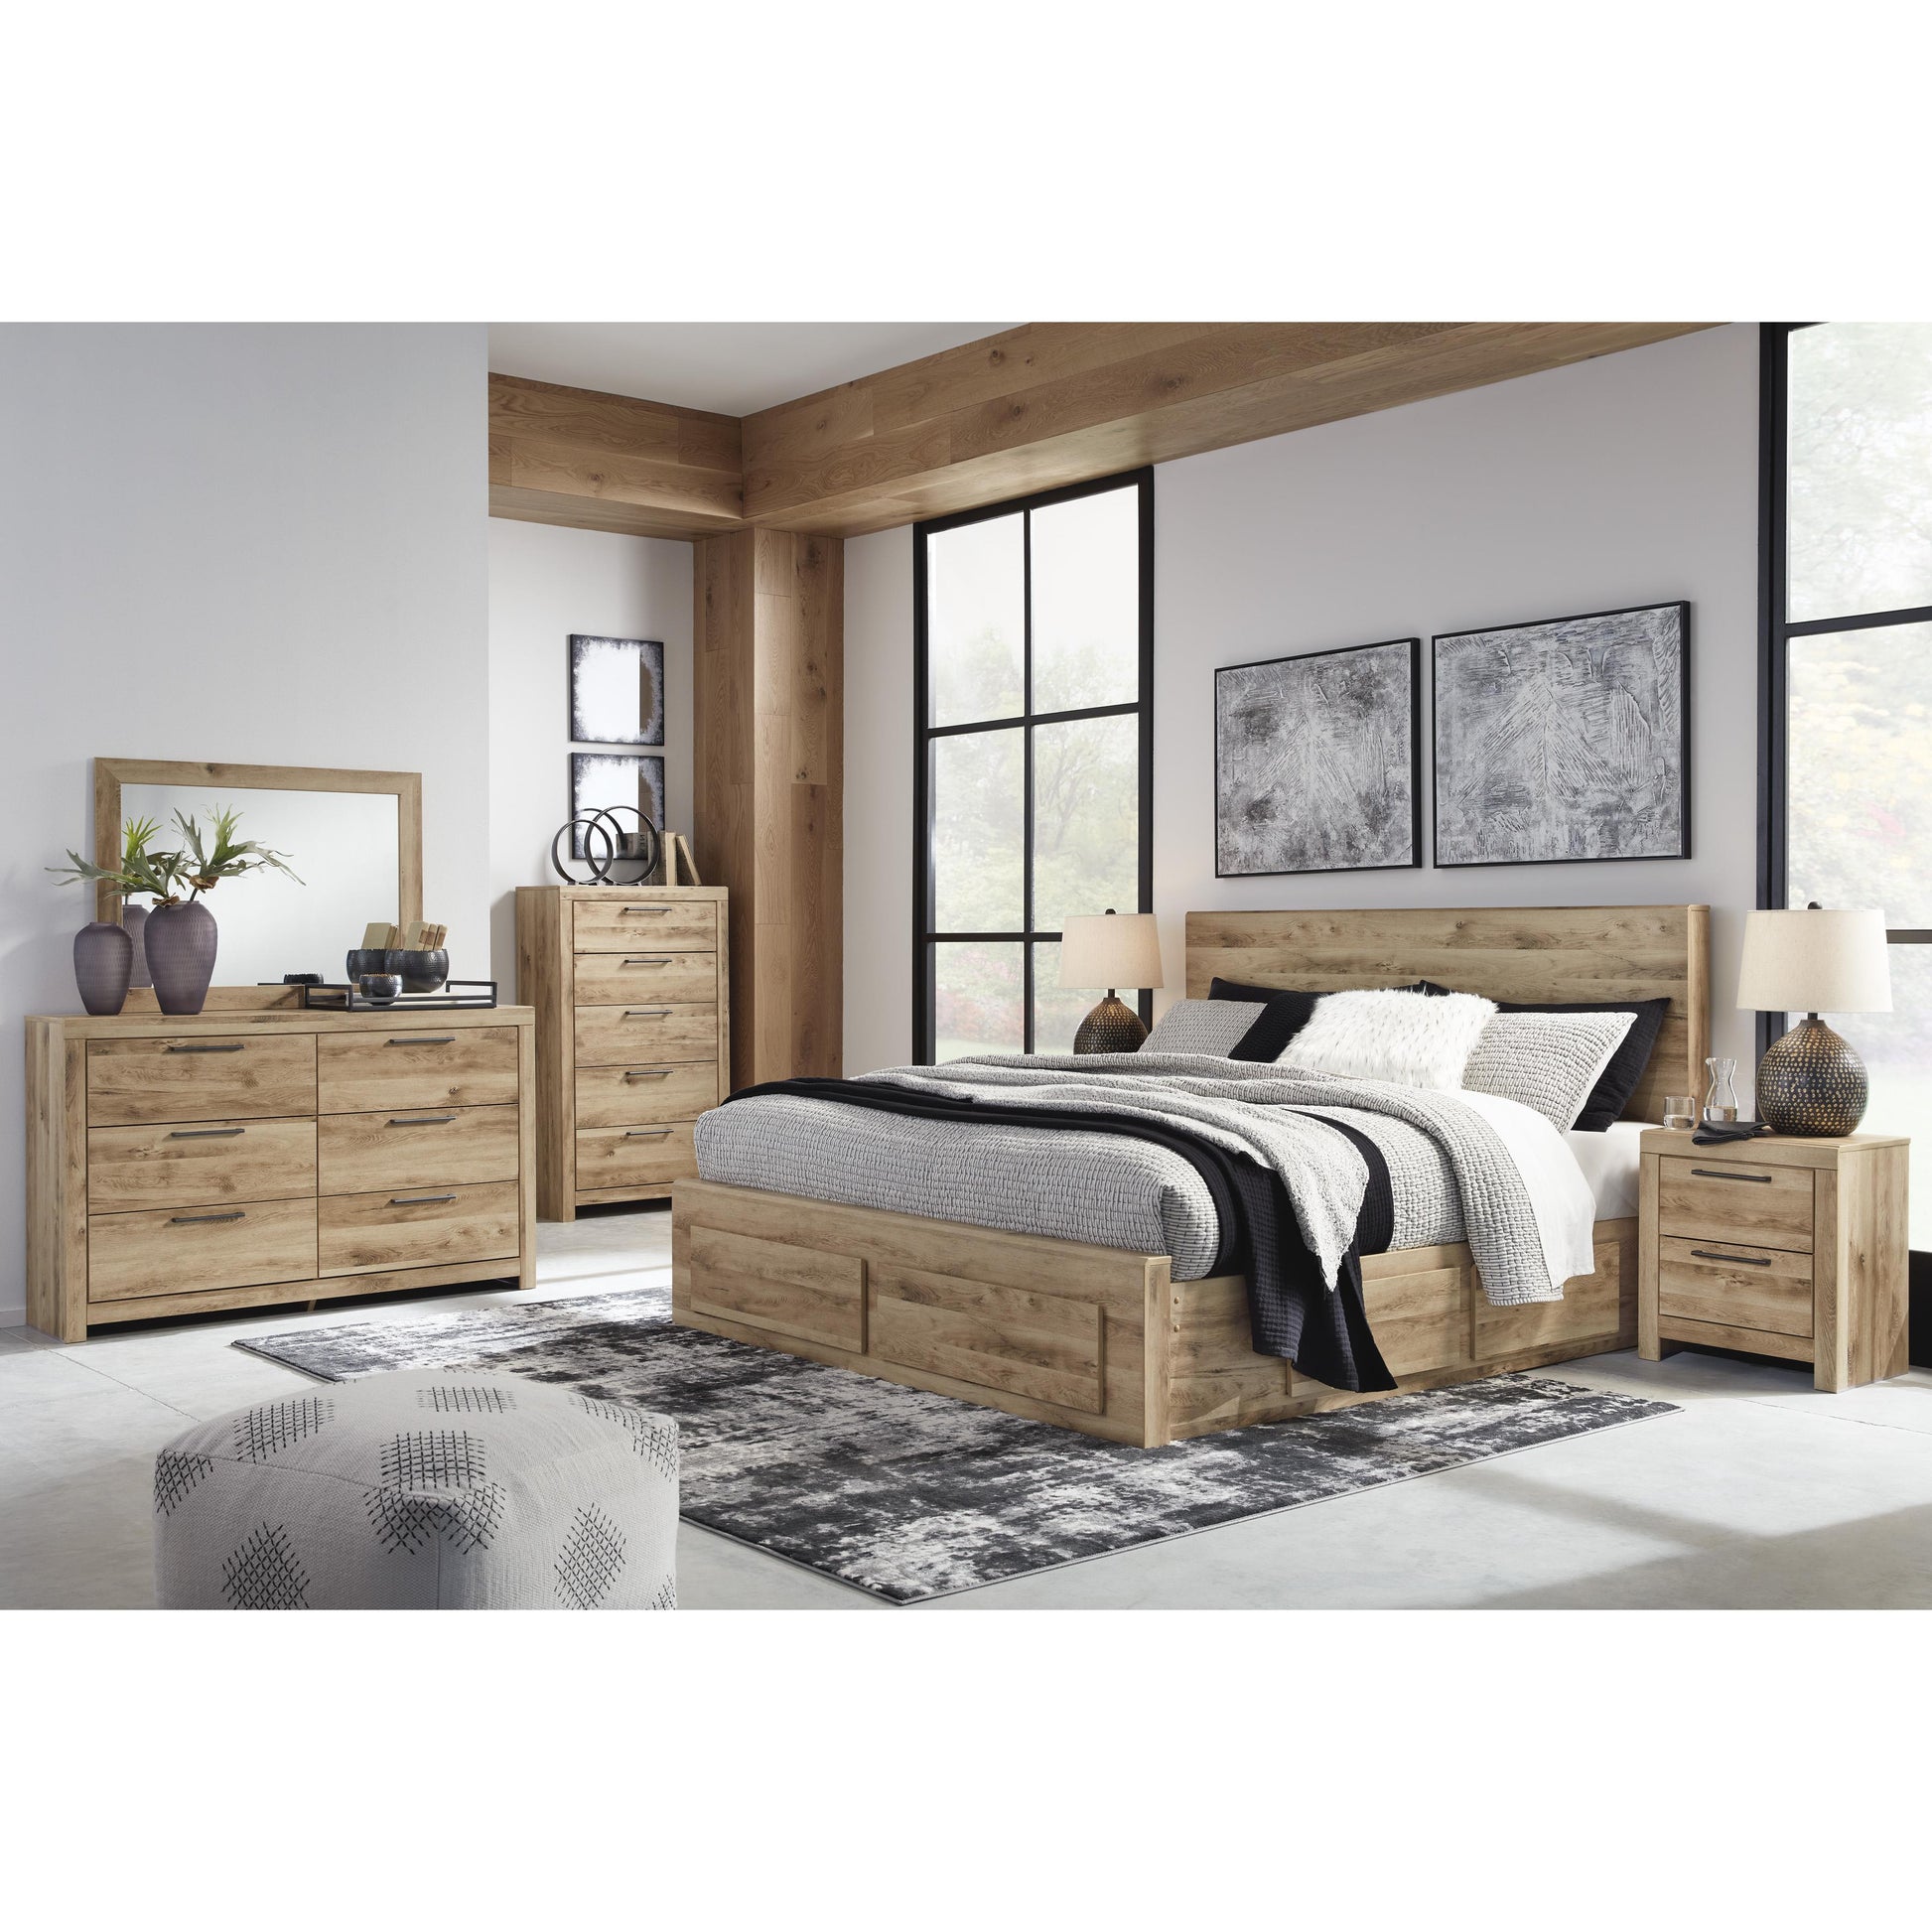 Signature Design by Ashley Hyanna Queen Panel Bed with Storage B1050-57/B1050-54S/B1050-60/B1050-95/B100-13 IMAGE 6